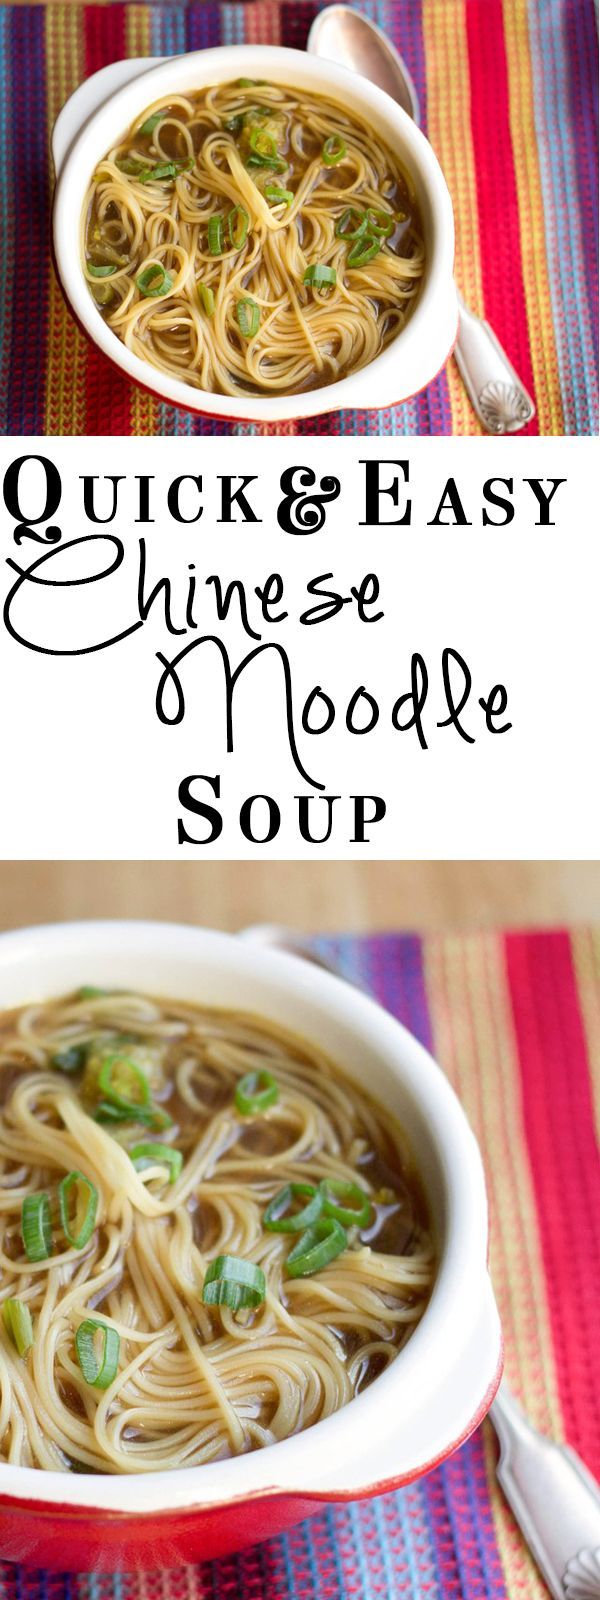 Quick and Easy Chinese Noodle Soup -   24 chinese recipes easy
 ideas